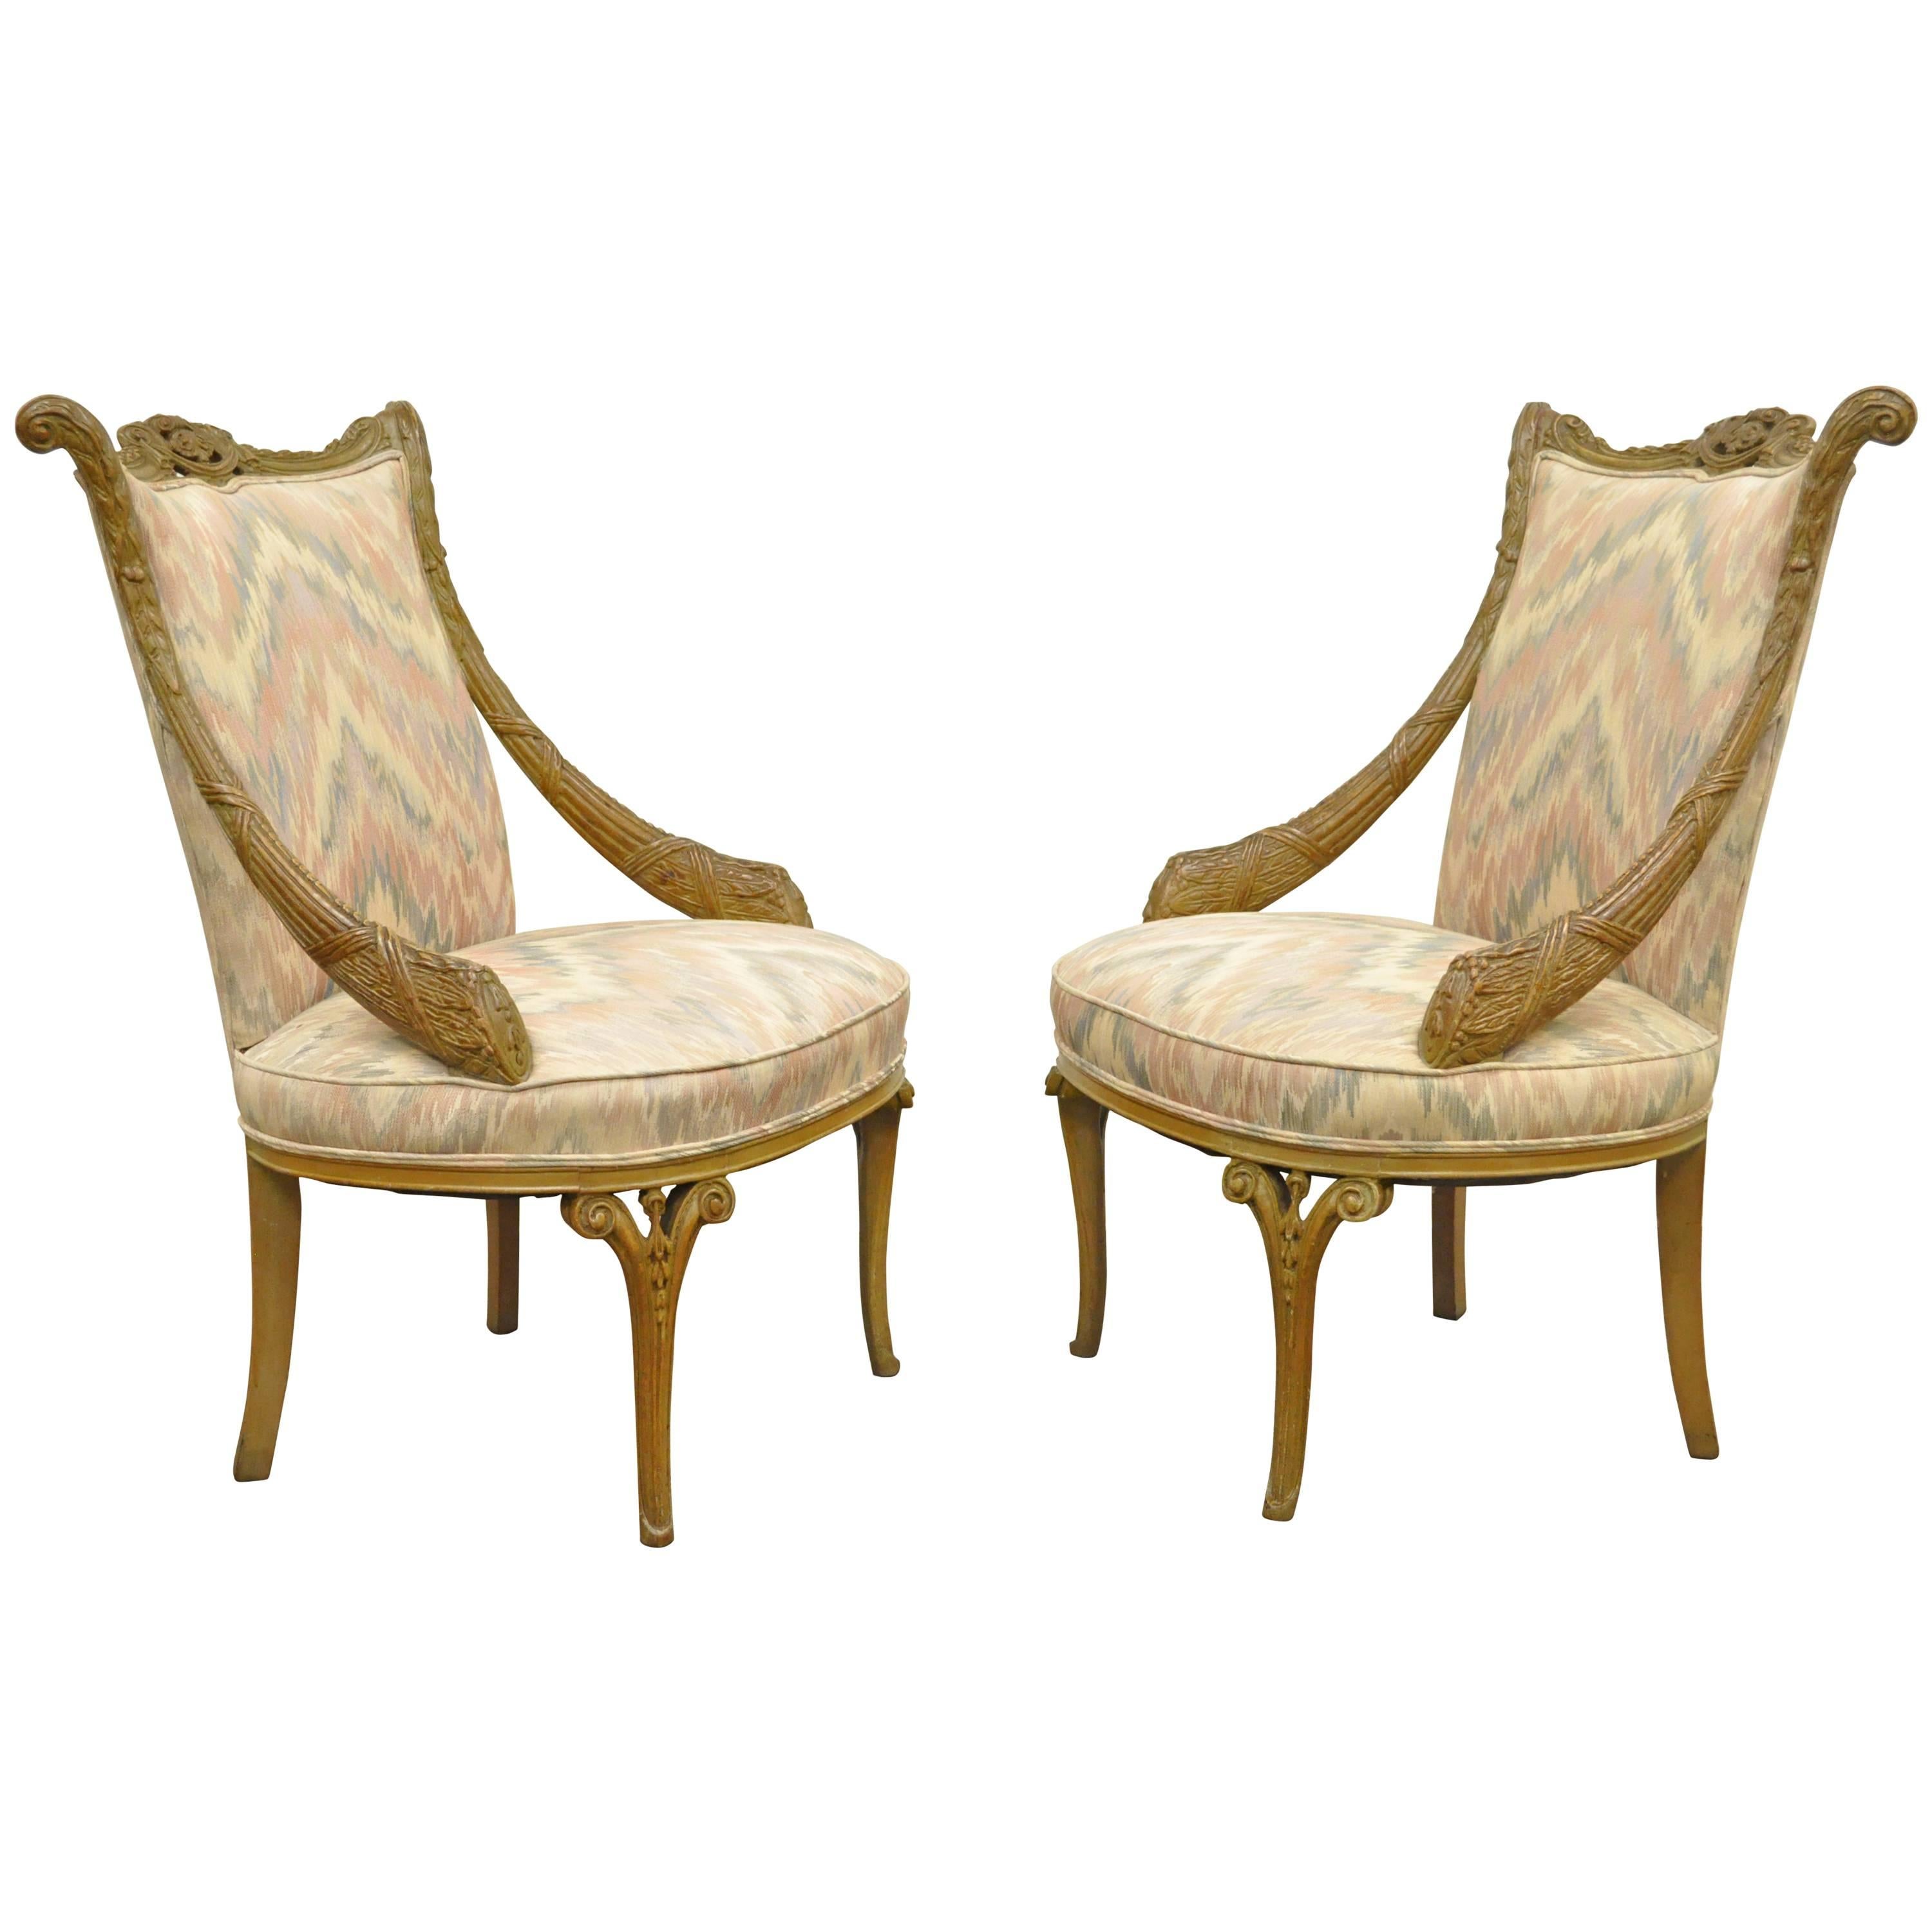 Pair 1940s Hollywood Regency Carved Parlor Chairs Attributed to Grosfeld House For Sale